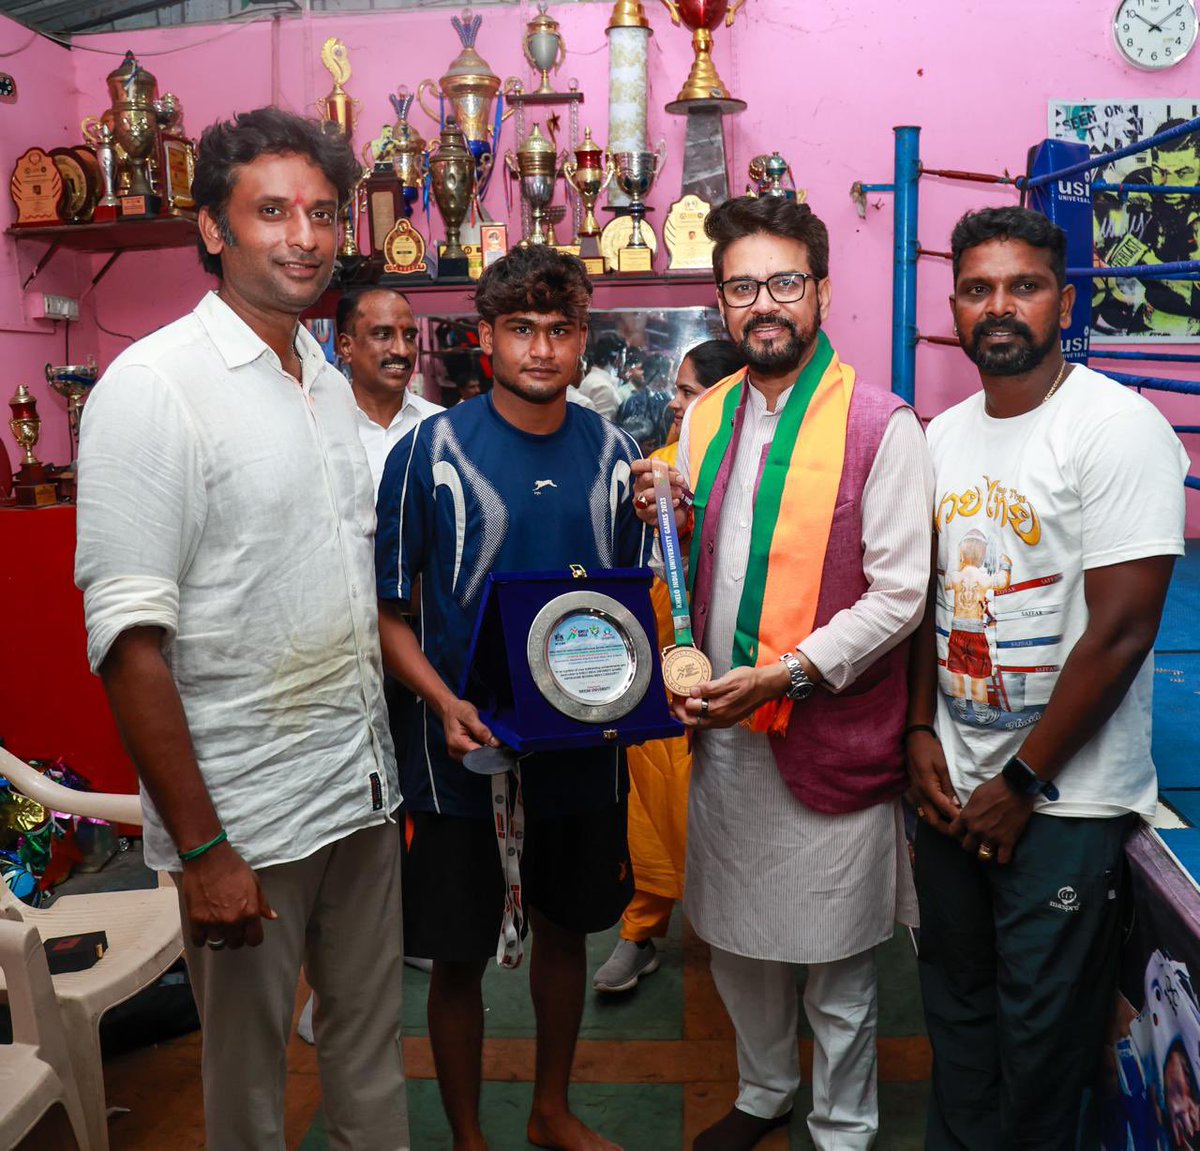 Thanks to my brother Shri @ianuragthakur for coming to my #CentralChennai constituency and giving students and youngsters a great boost to move towards sports. 

Together we will make more Olympic level athletes from Chennai in next 5 years 🔥

#KheloIndia #Vinoj4CentralChennai…